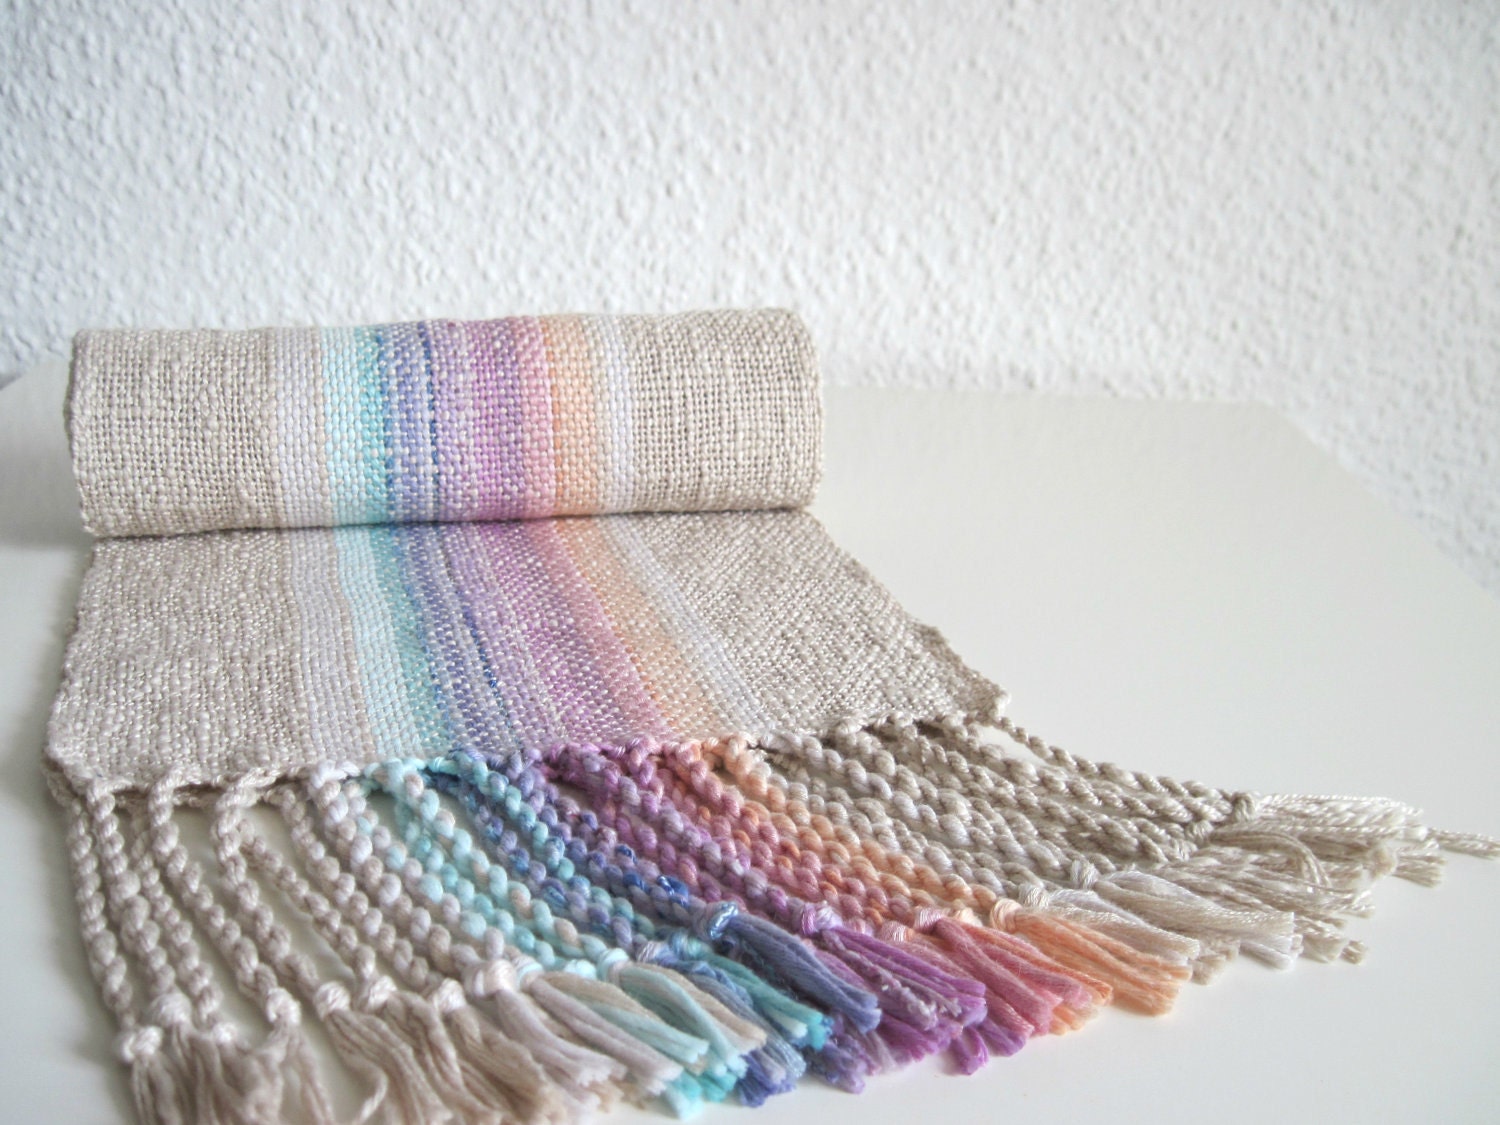 Handwoven Scarf - Cotton and Eco Friendly Fibers Pinks and Blue - 'Clouds at Sunset' - SameheartDesigns